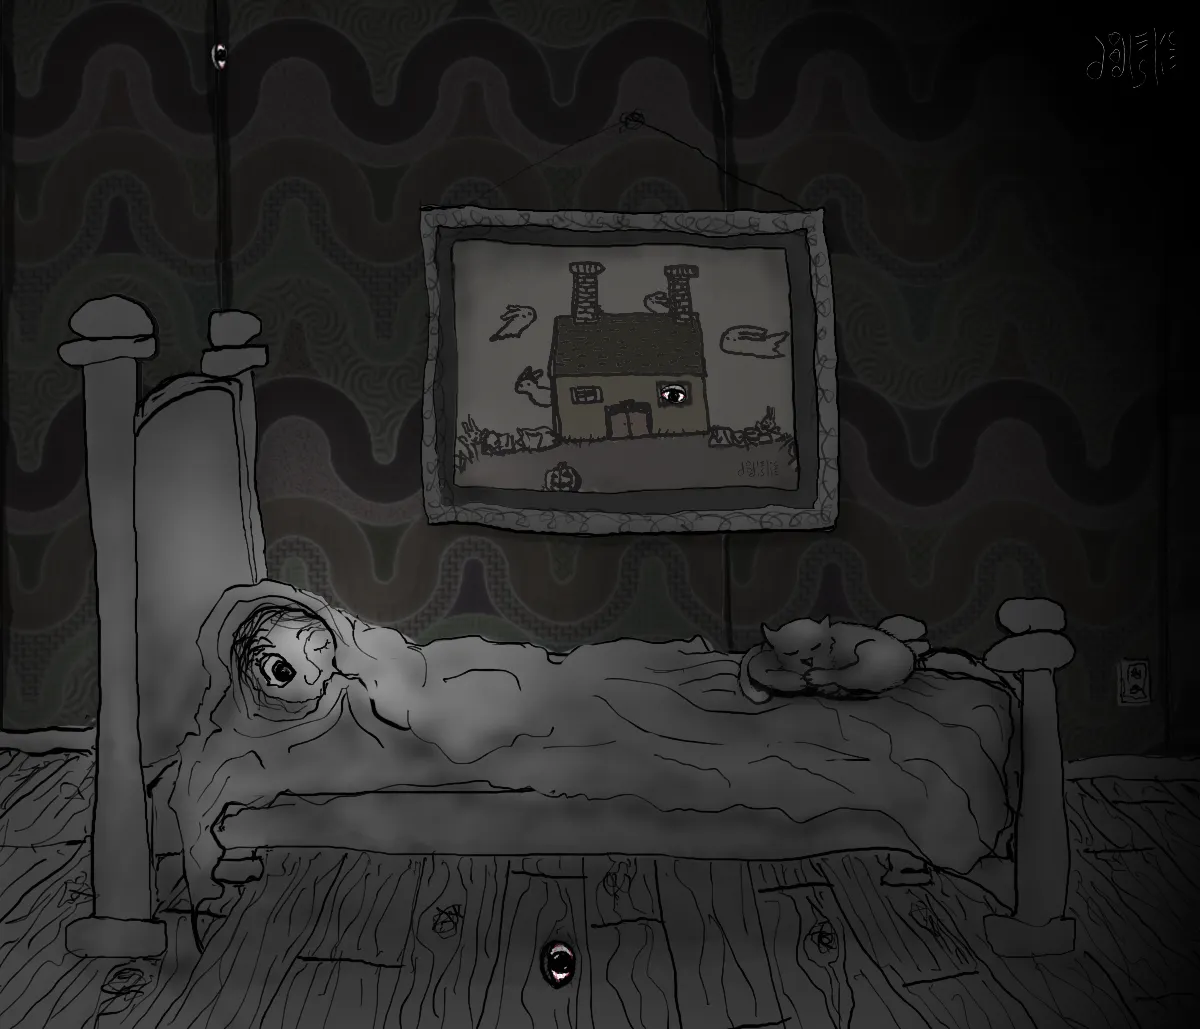 Inconspicuous Observers is an illustration of a dark bedroom with a figure bunched up under the blankets. The person has one eye shut and one eye wide open. There is also a cat sleeping on the bed. There is a picture of a spooky house hanging on the wall. There are also three creepy eyes staring — one below the floor, one from a winfow in the house in the picture, and one between the edges of the wallpaper. By Doodleslice 2024